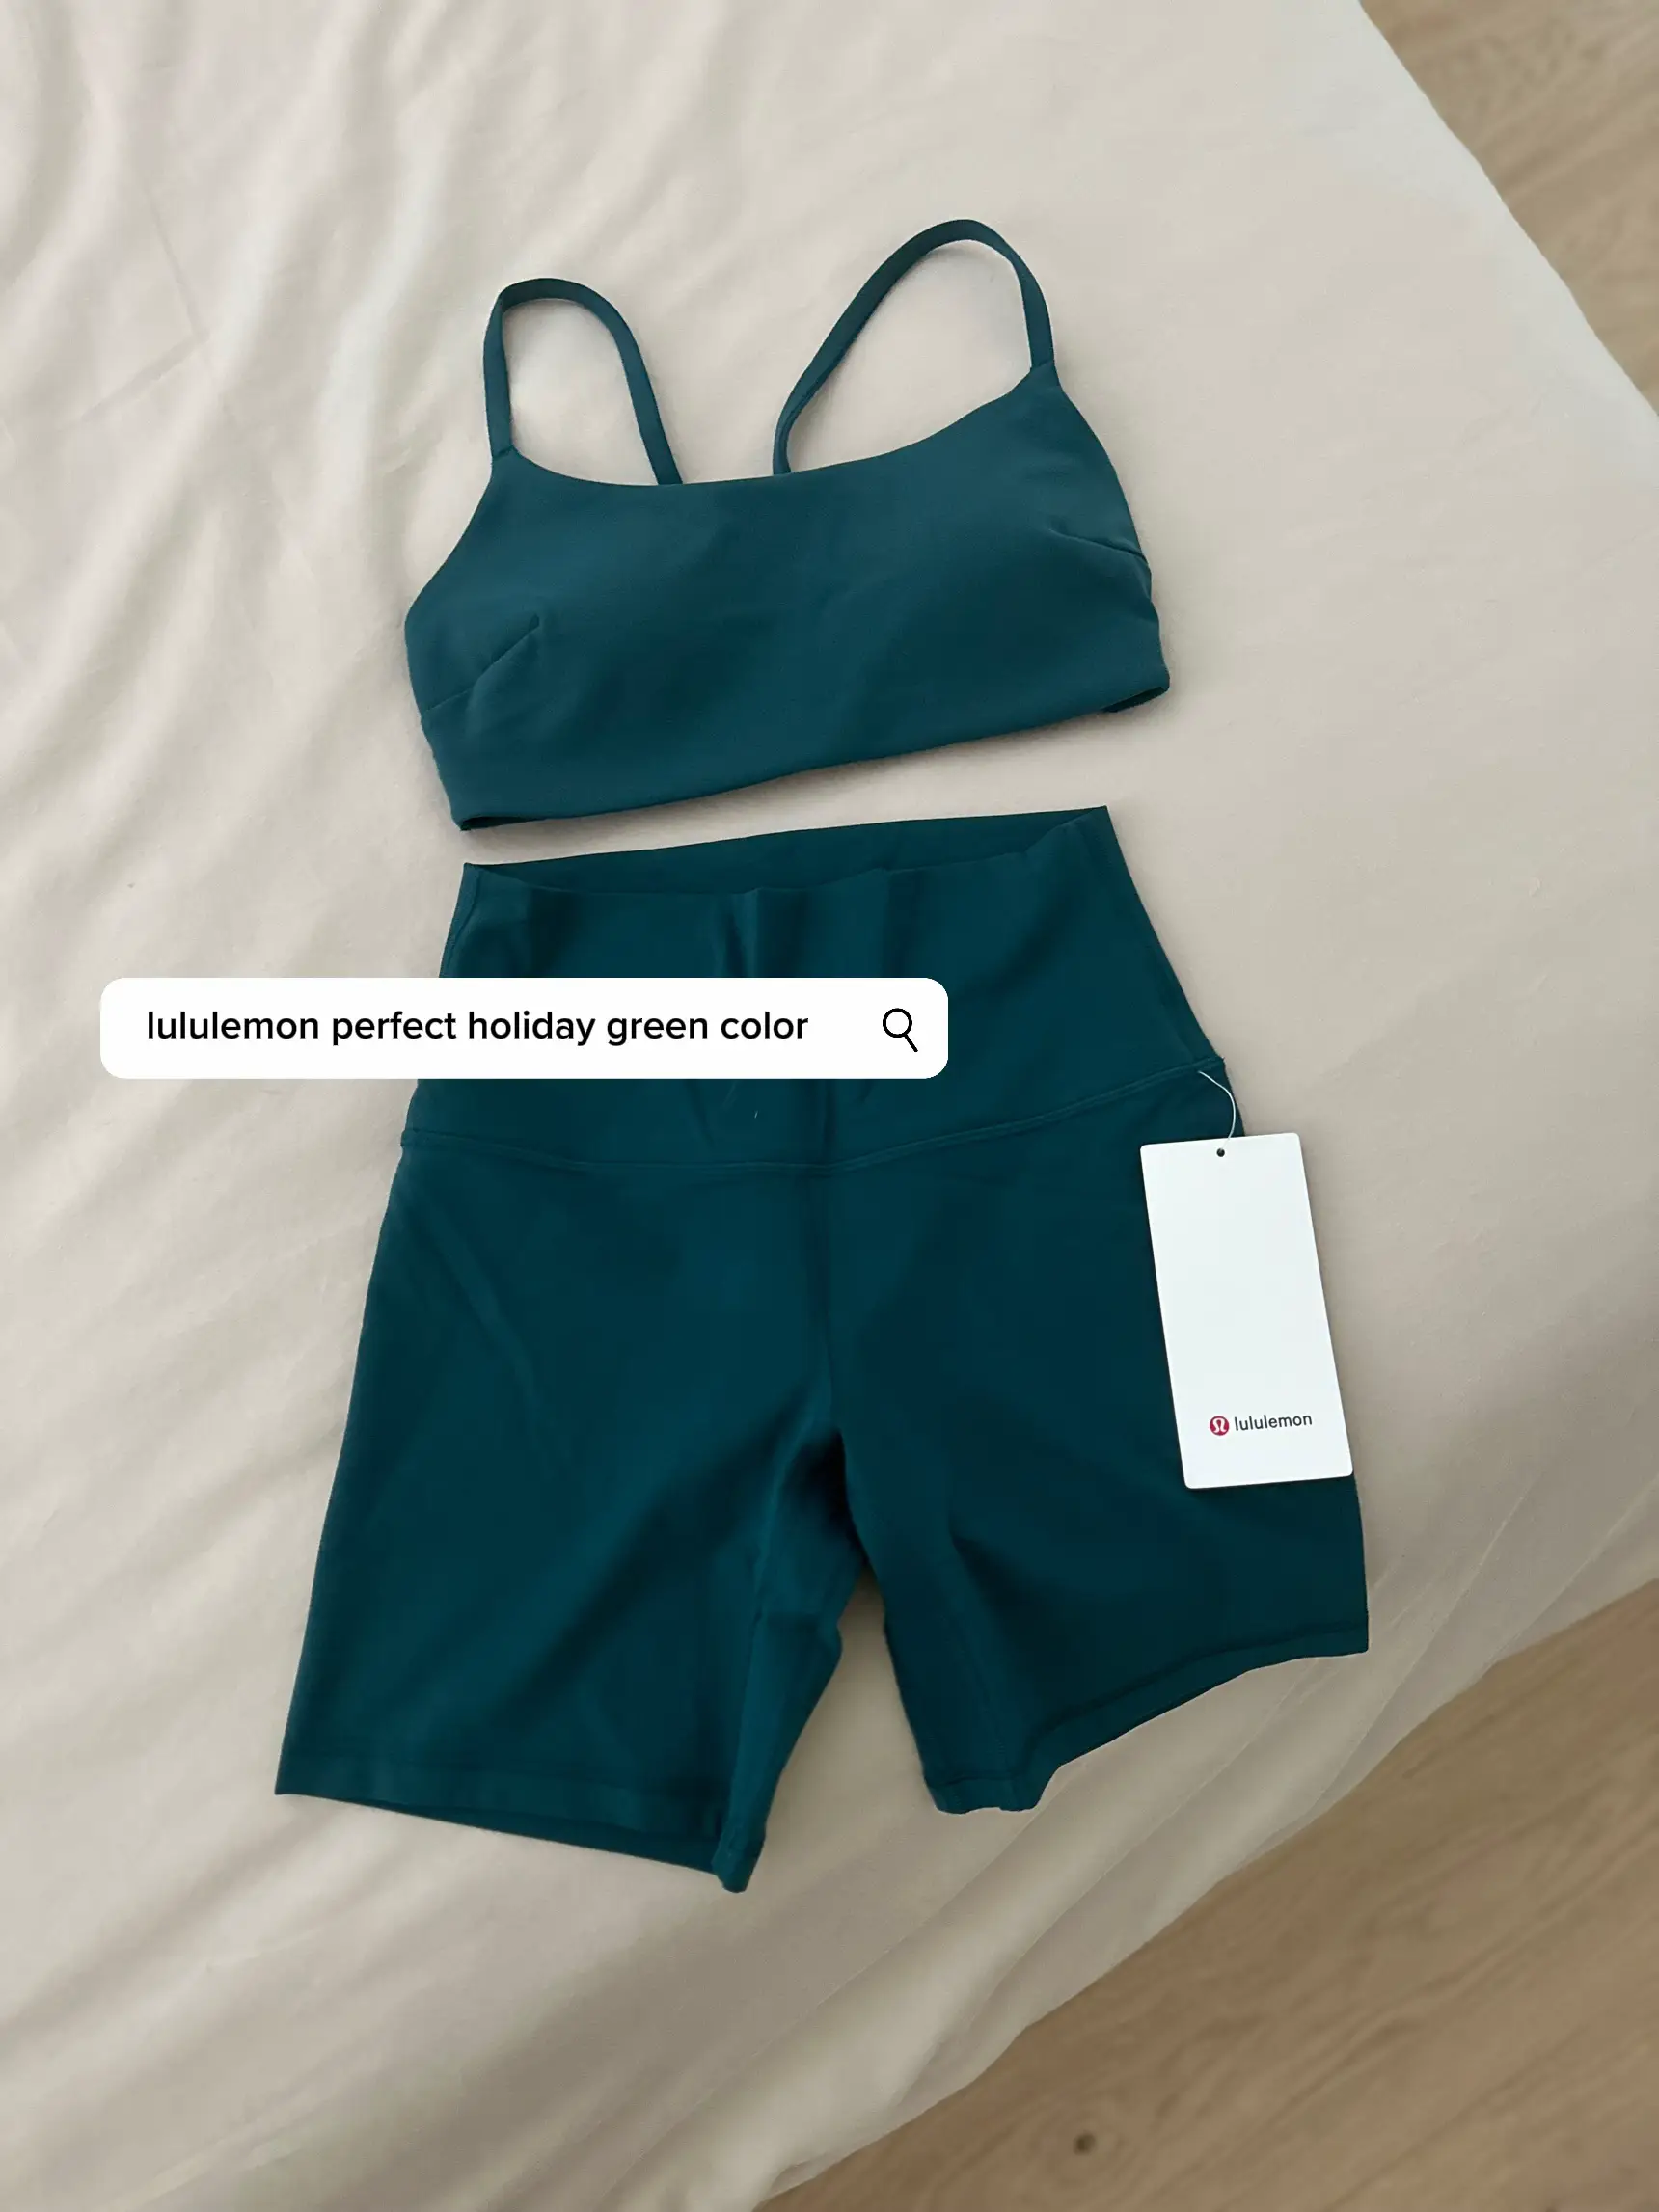 Run, don't walk on this perfect colour set from @lululemon. This